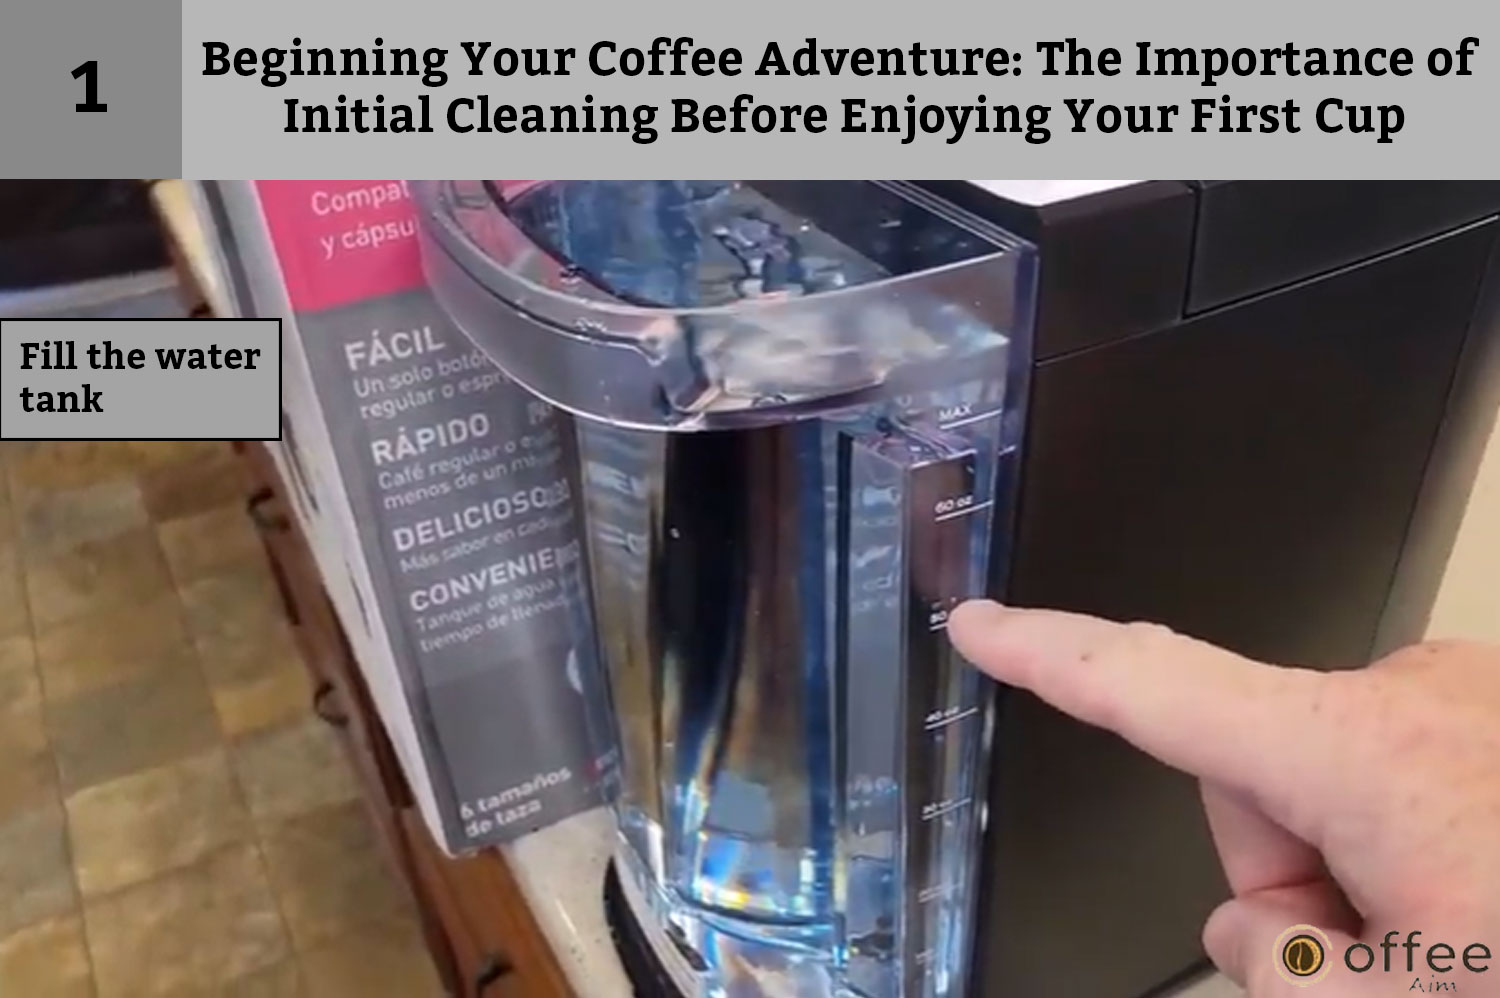 This image provides instructions on how to "Fill the water tank" as part of the guide titled "Beginning Your Coffee Adventure: How to Connect Nespresso Vertuo Creatista Machine."